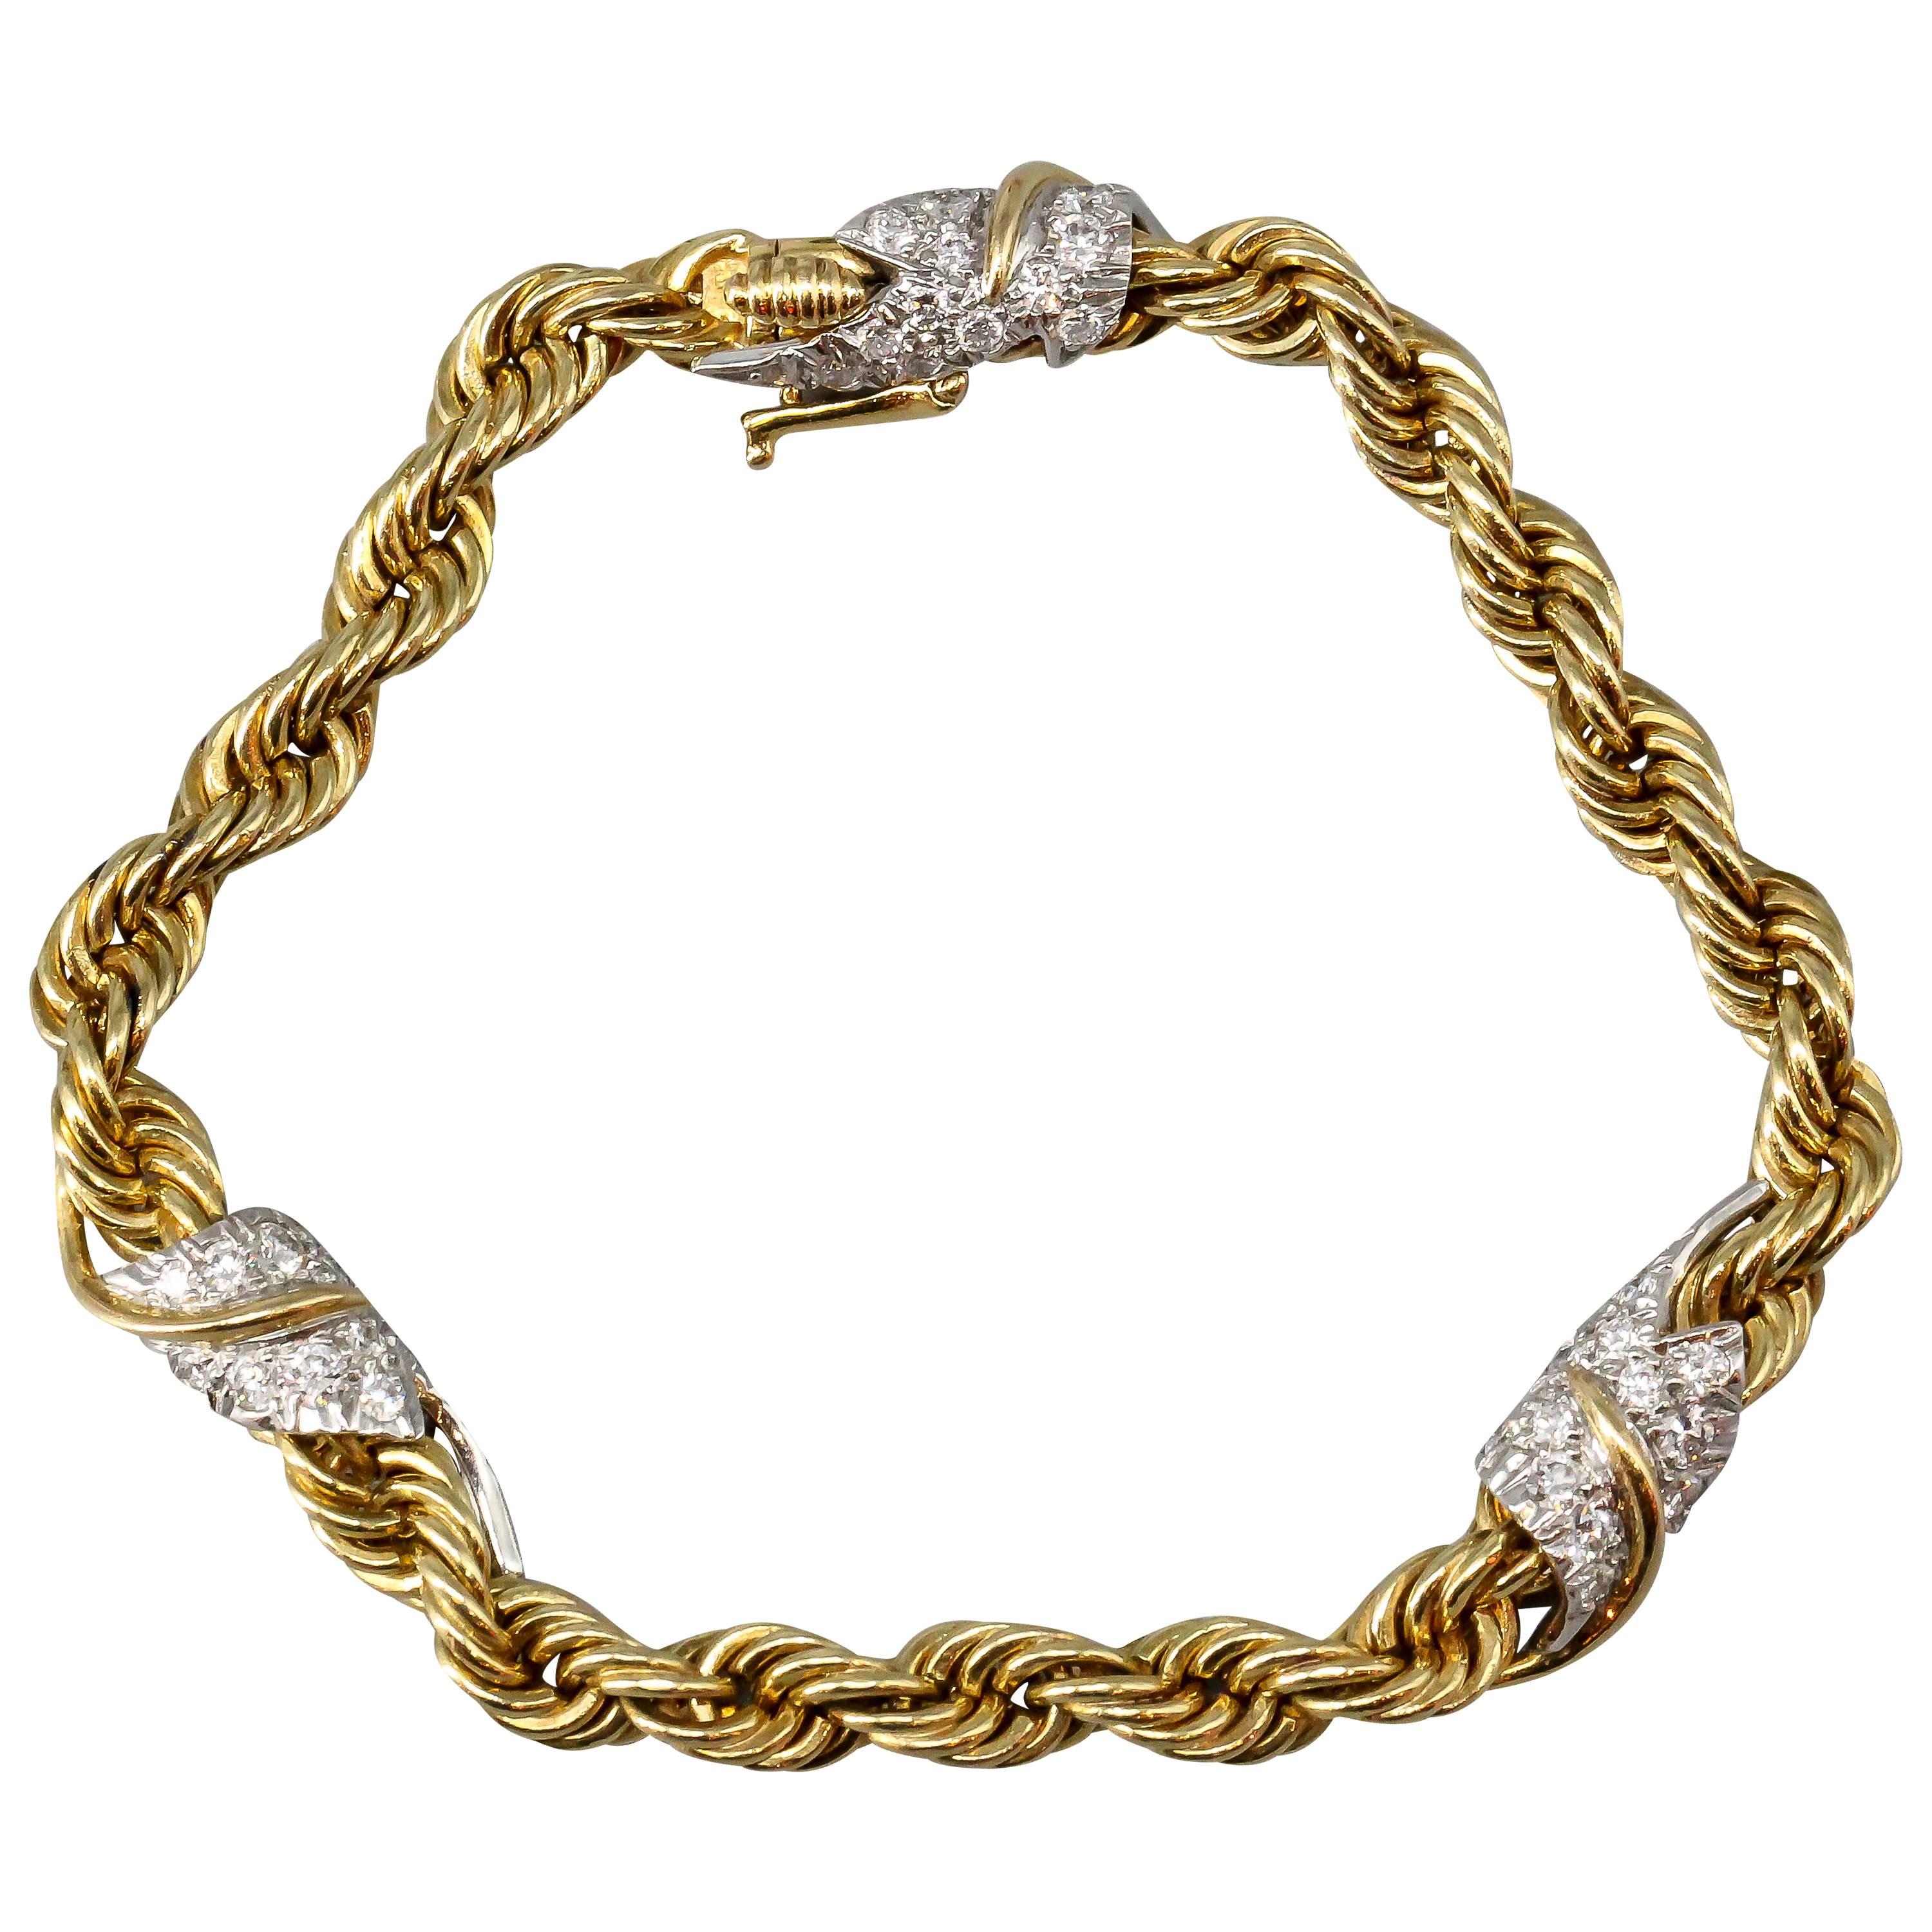 TIFFANY & CO. SCHLUMBERGER Diamond and Gold Rope Leaf Bracelet